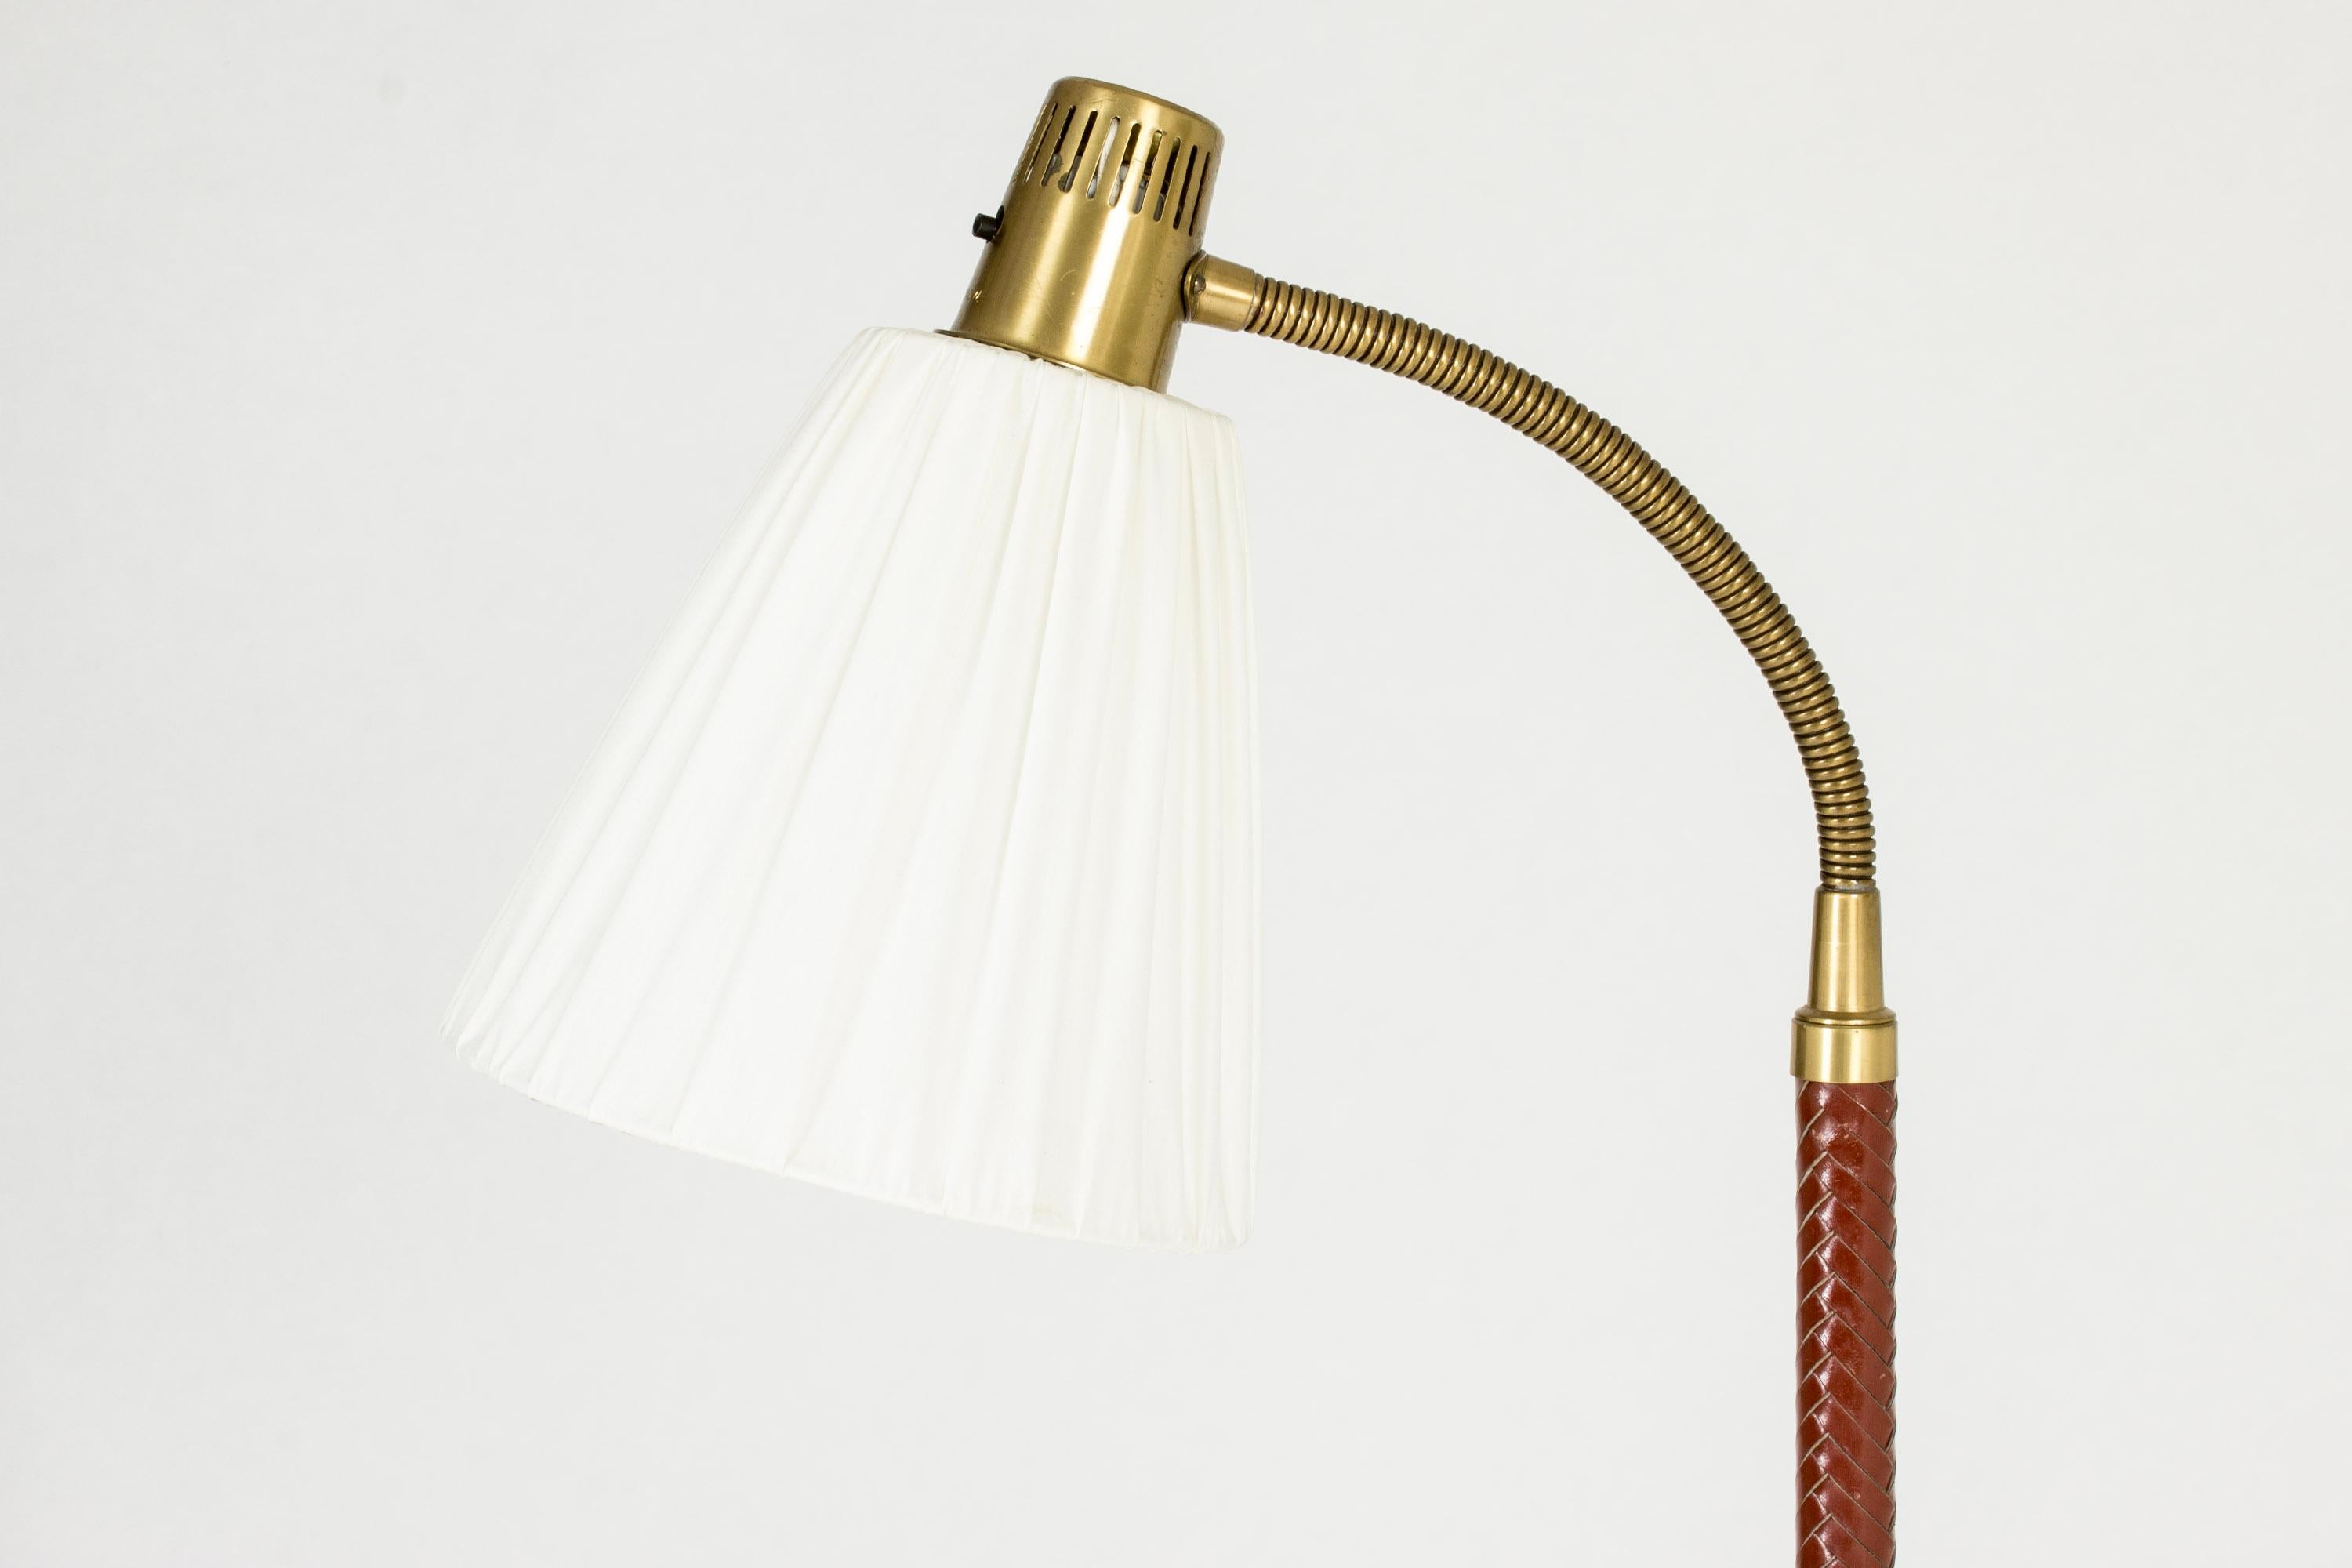 Elegant floor lamp by Hans Bergström, made from brass and dressed in wreathed red leather. Flexible neck.

About Hans Bergström: 
Hans Bergström was the owner and creative director of the lighting firm Ateljé Lyktan, which he founded in Åhus in the